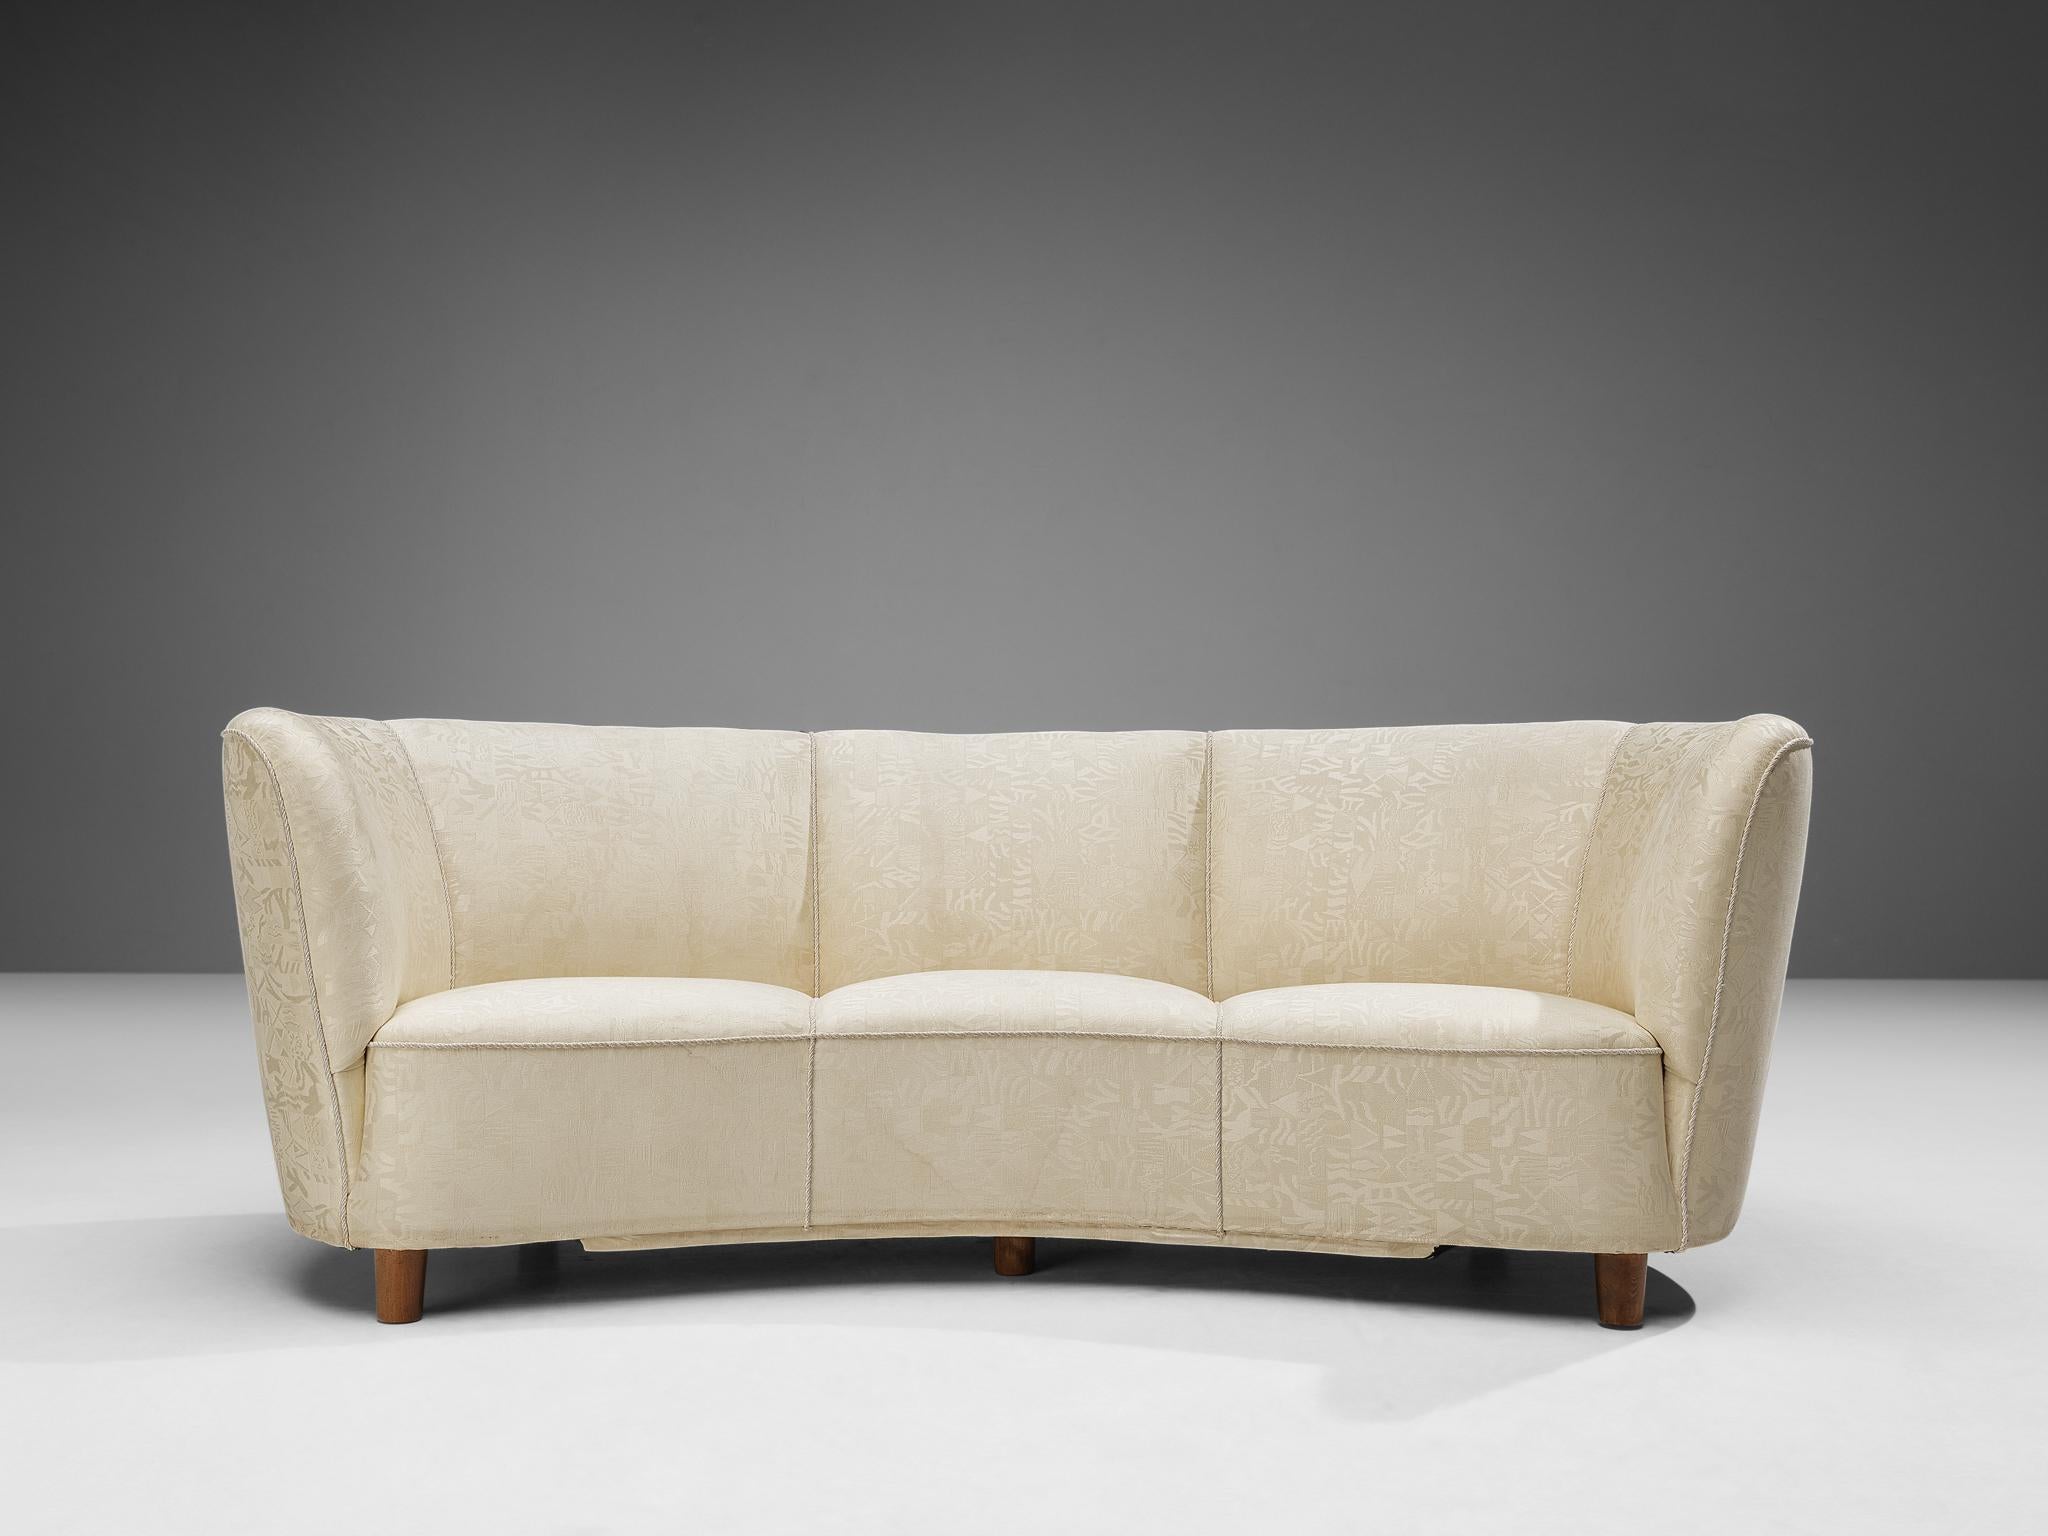 Banana sofa, off white upholstery, wooden legs, Denmark, 1940s.

This voluptuous sofa is executed in a wonderful off white fabric with a special looking pattern in it. The sofa has a high lined and curved back, while the backrest is horizontal